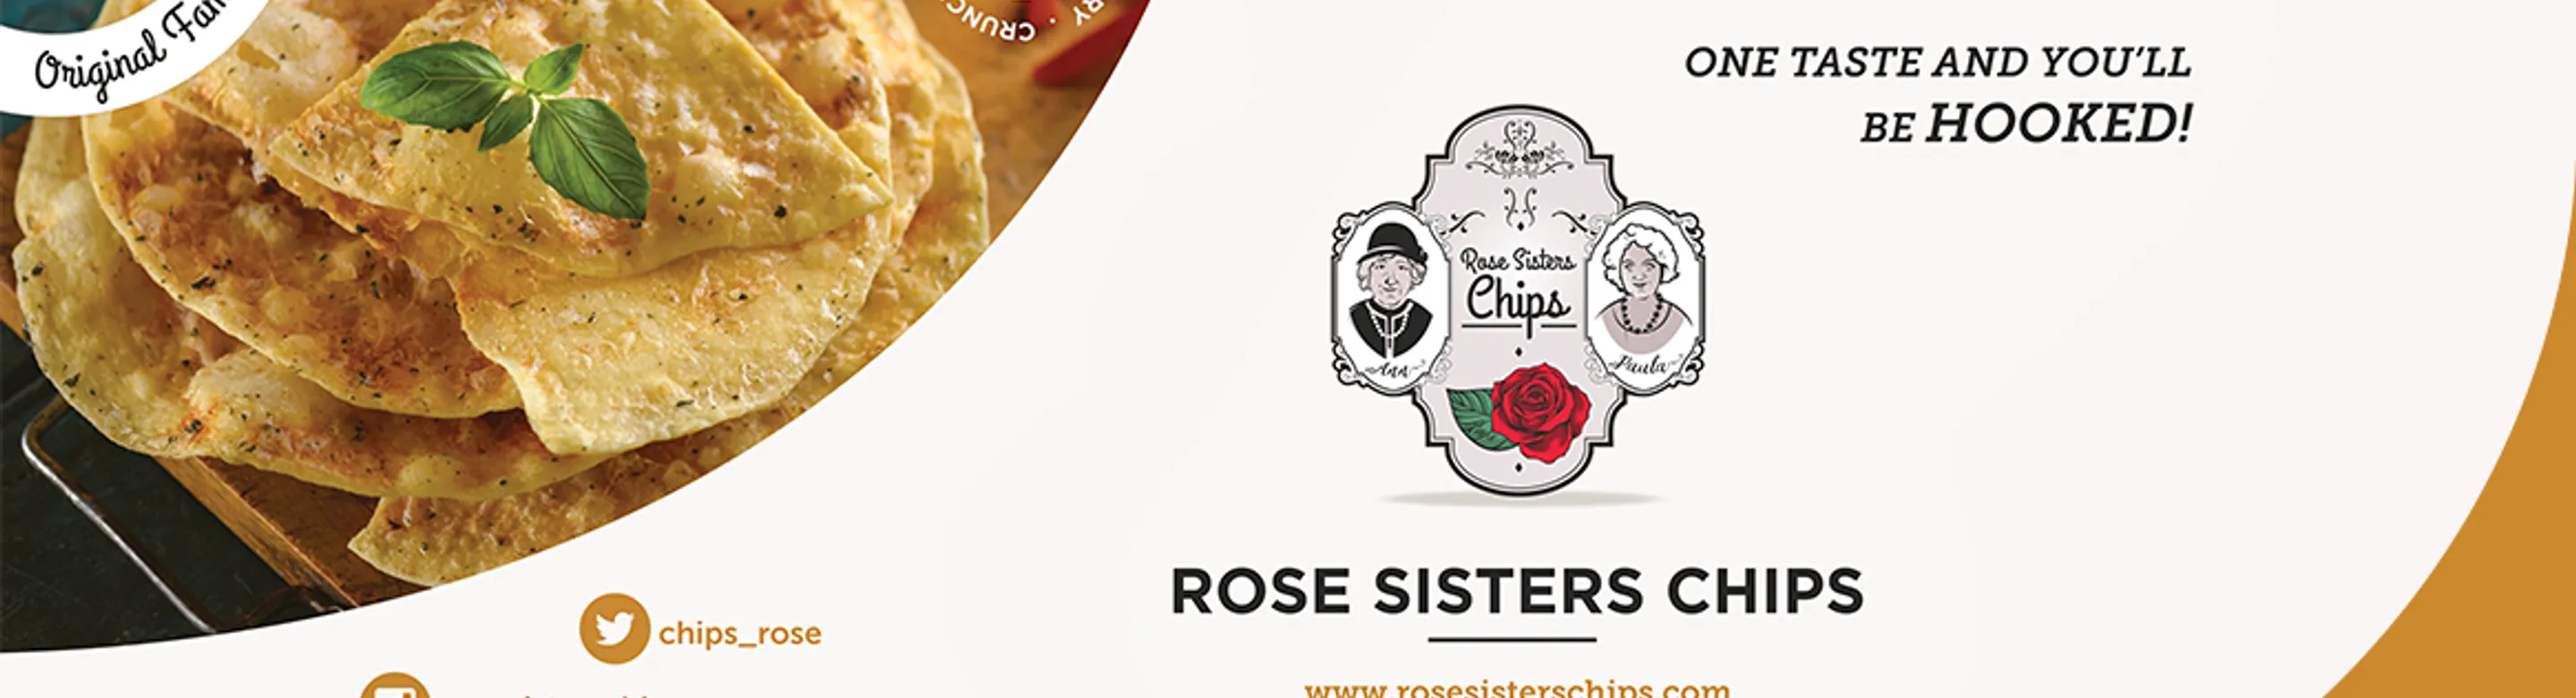 Rose Sisters Chips